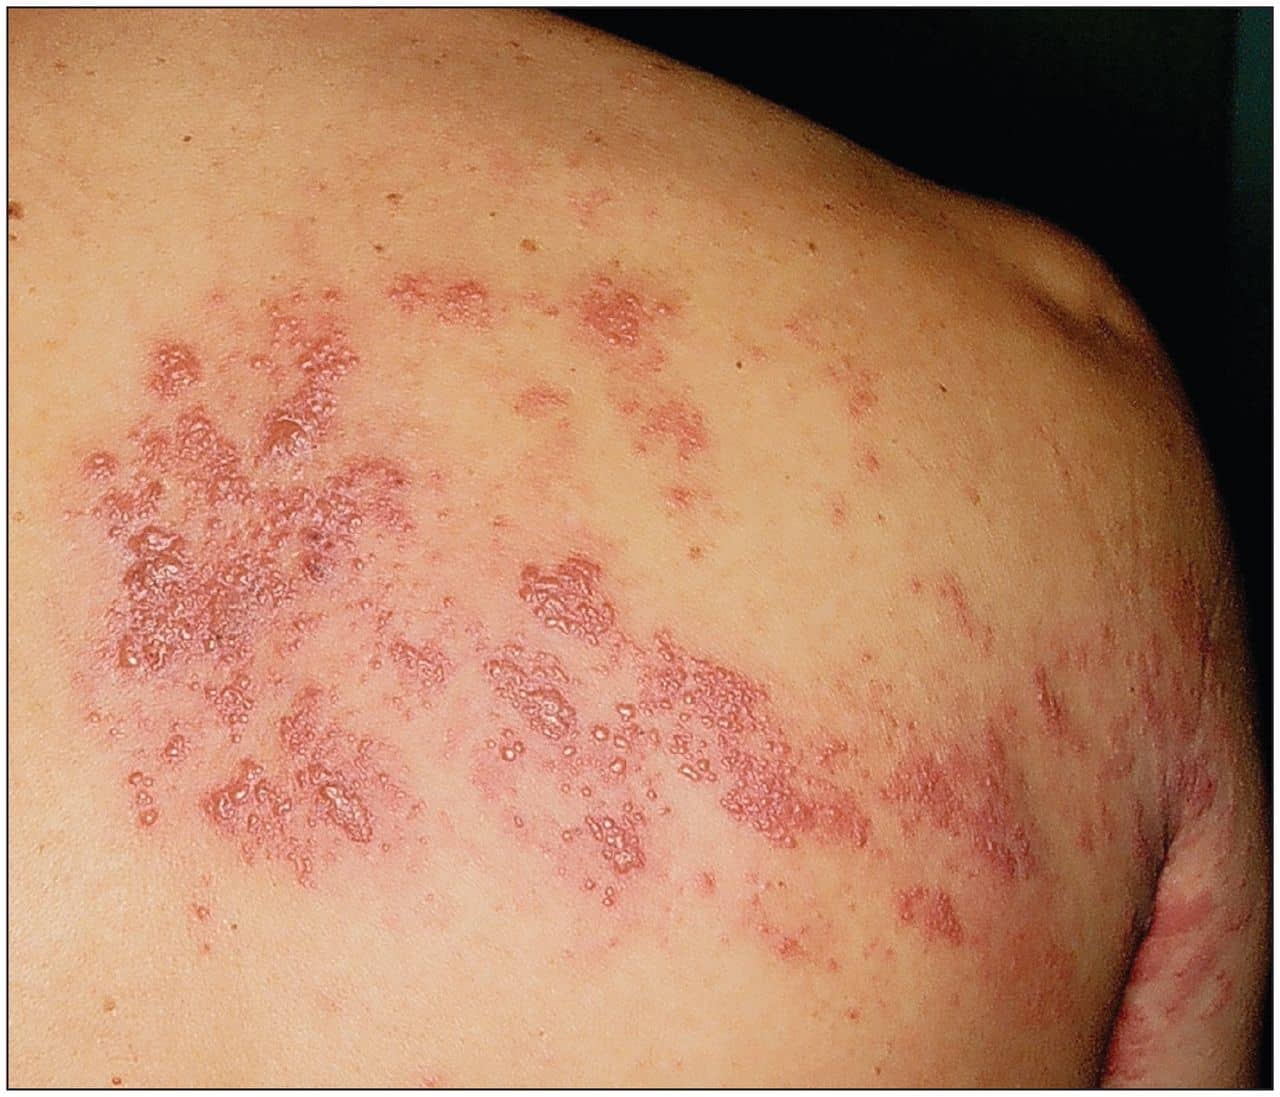 How Would I Know If I Have Shingles